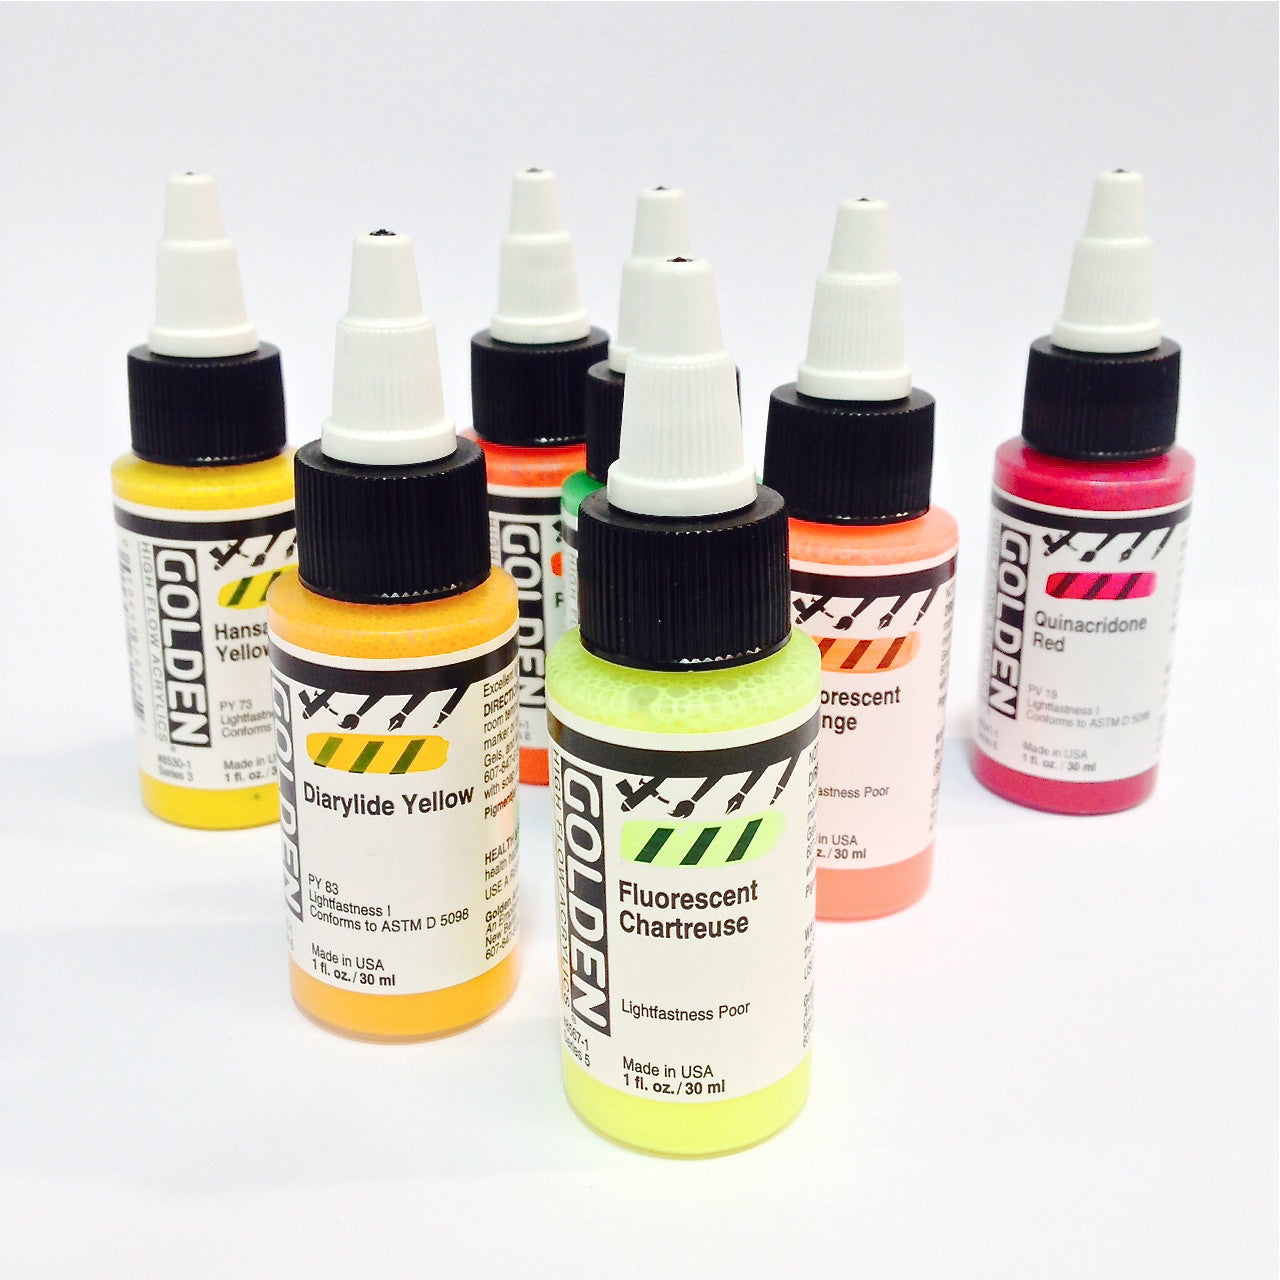 NEW High Flow Acrylics [Airbrush] Set from GOLDEN 